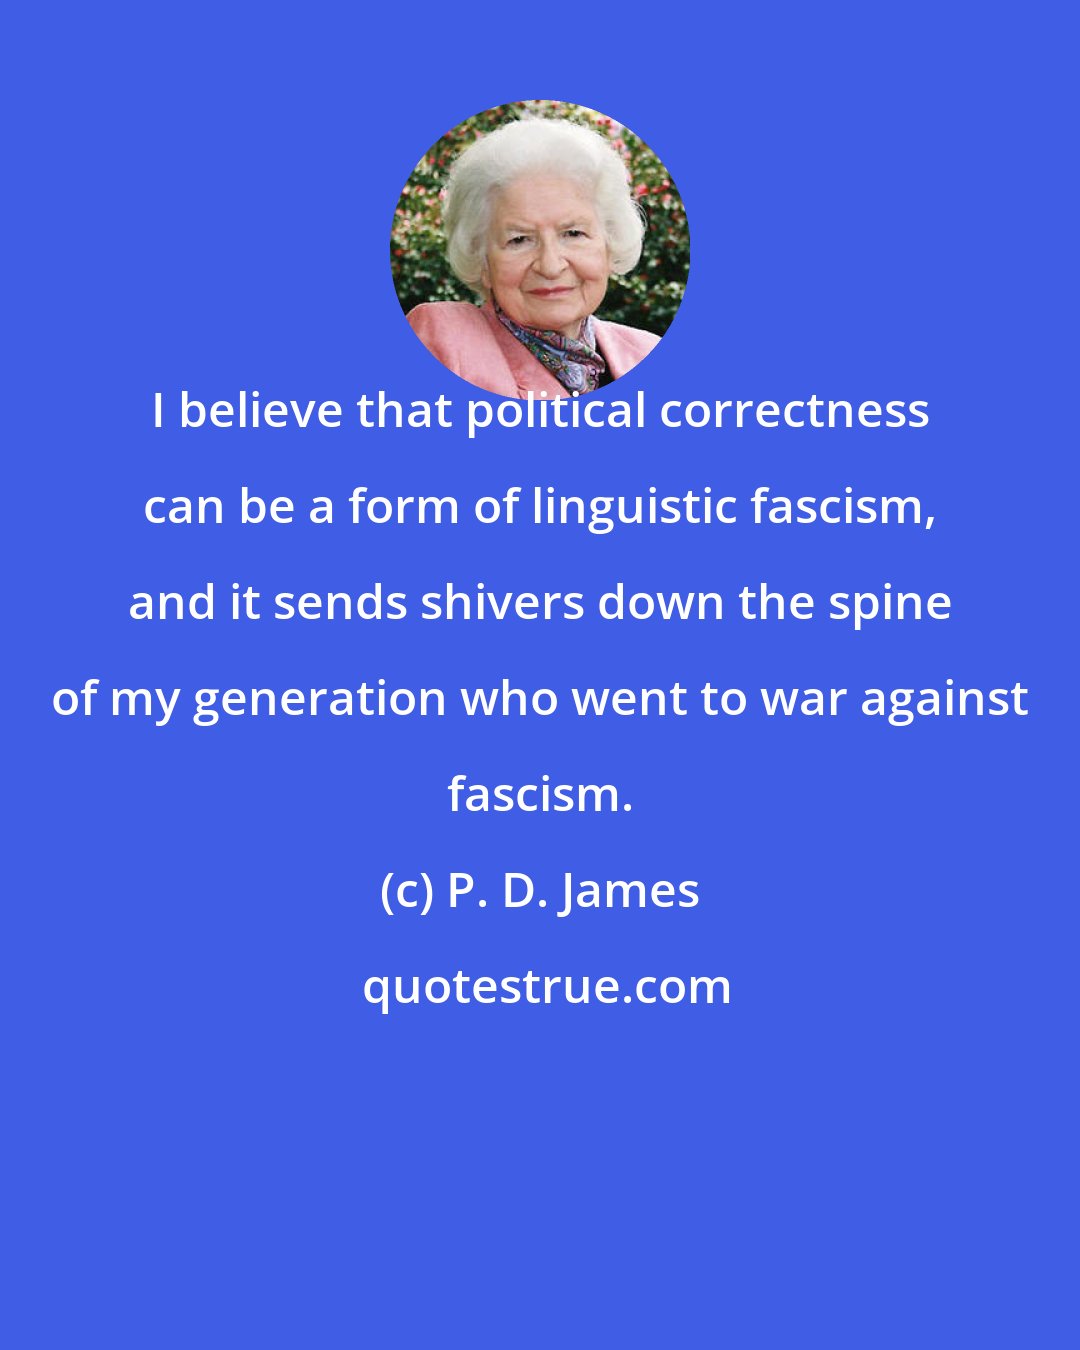 P. D. James: I believe that political correctness can be a form of linguistic fascism, and it sends shivers down the spine of my generation who went to war against fascism.